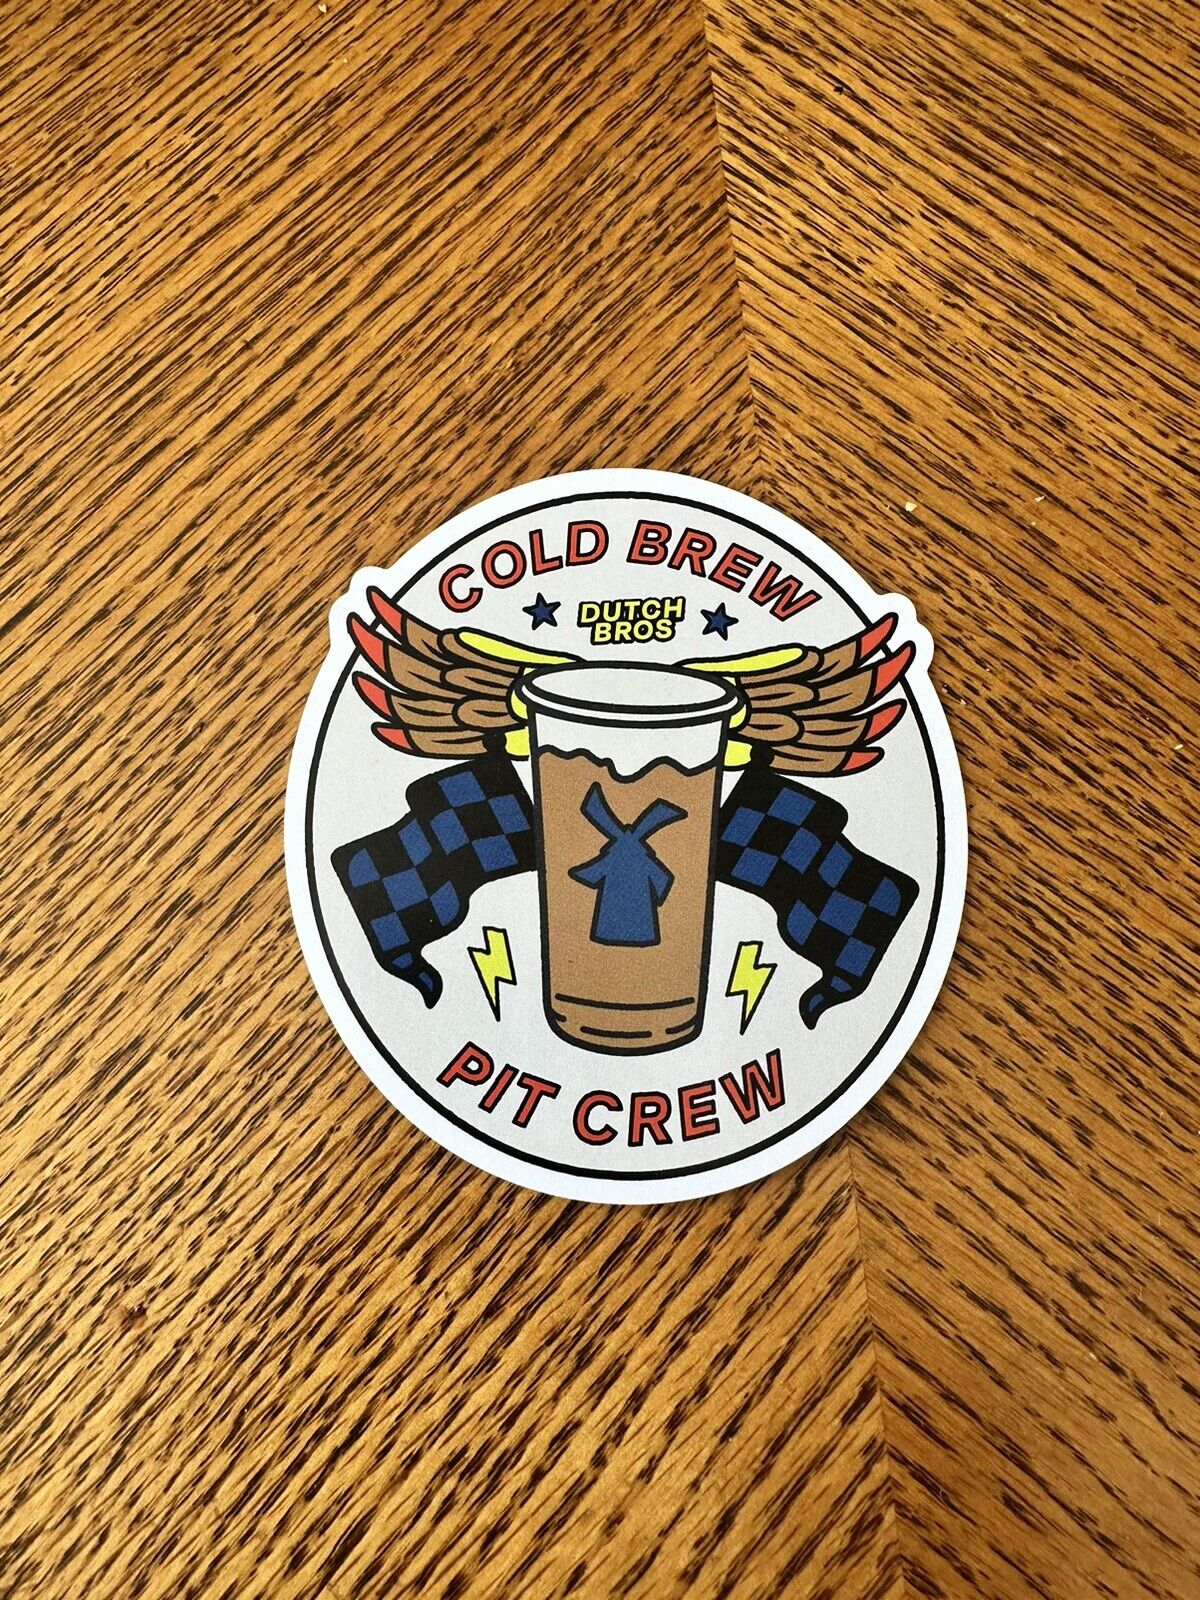 *NEW* DUTCH BROS 4/20 National Cold Brew Day Stickers